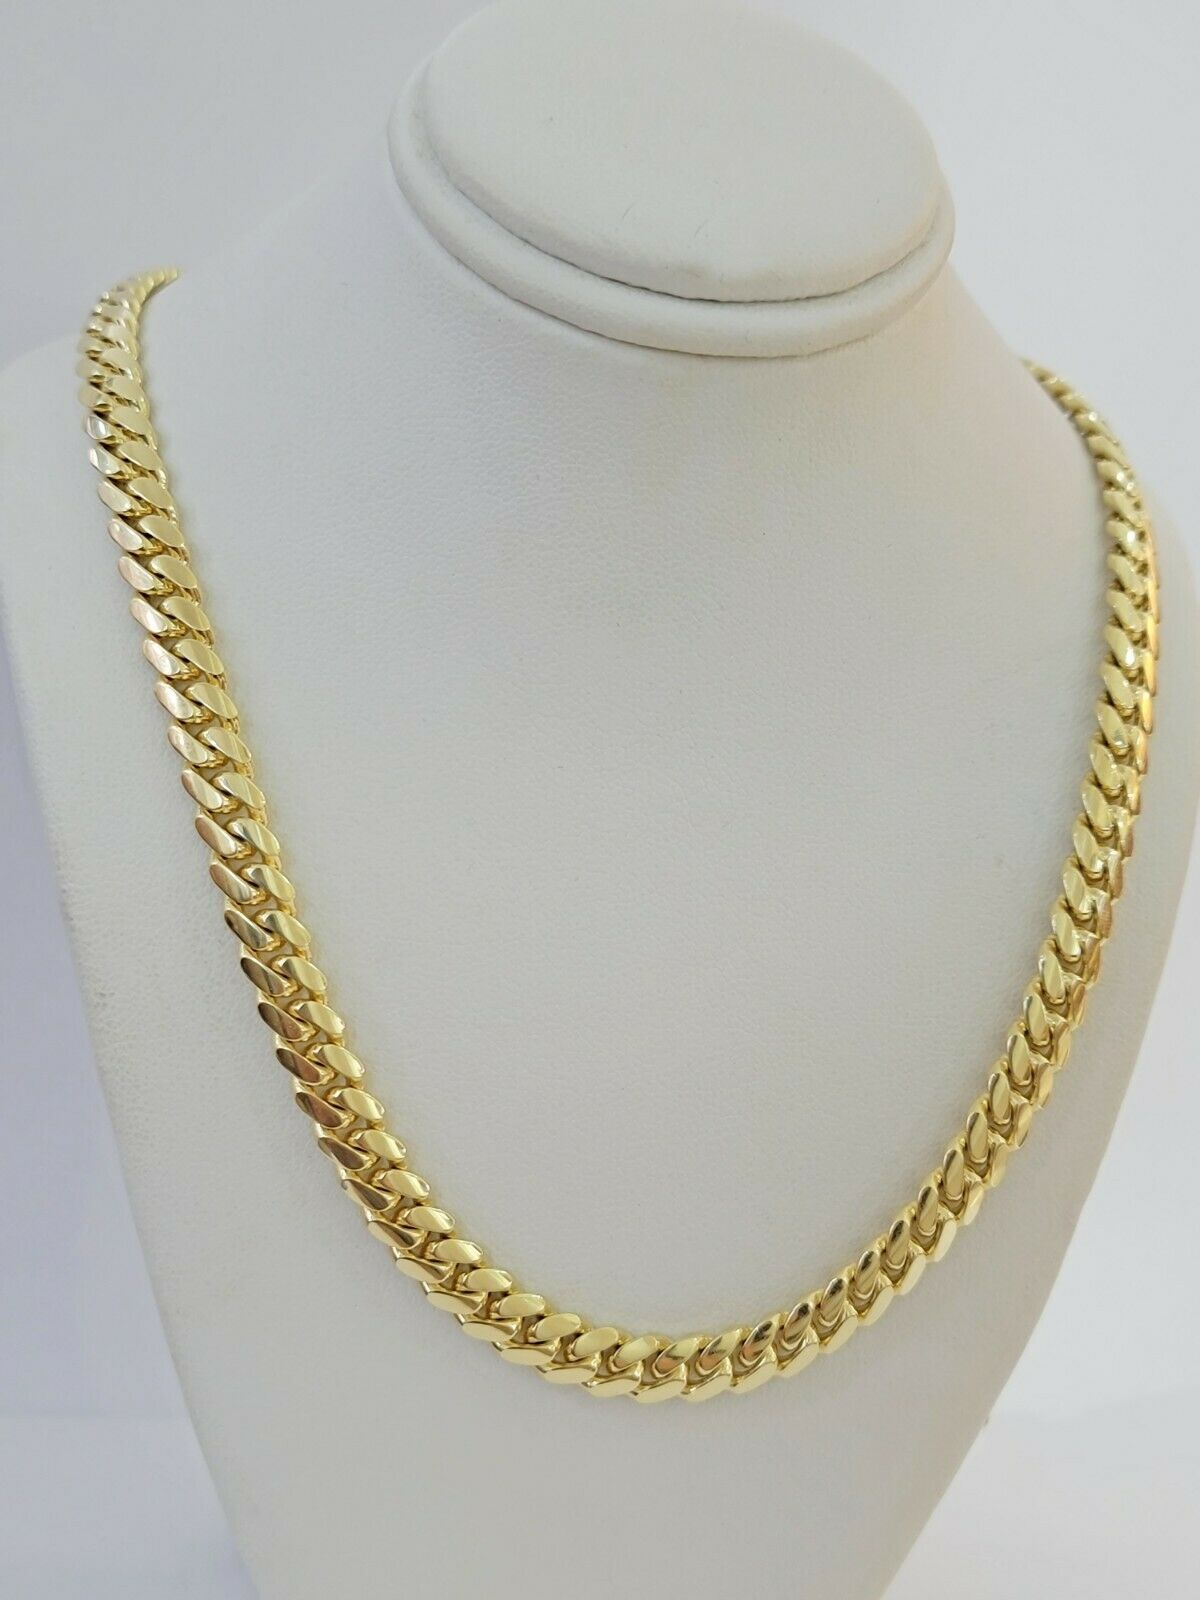 Real 10k Gold Chain Miami Cuban Solid Link Necklace 24" Inch 7mm 10KT BOX CLASP